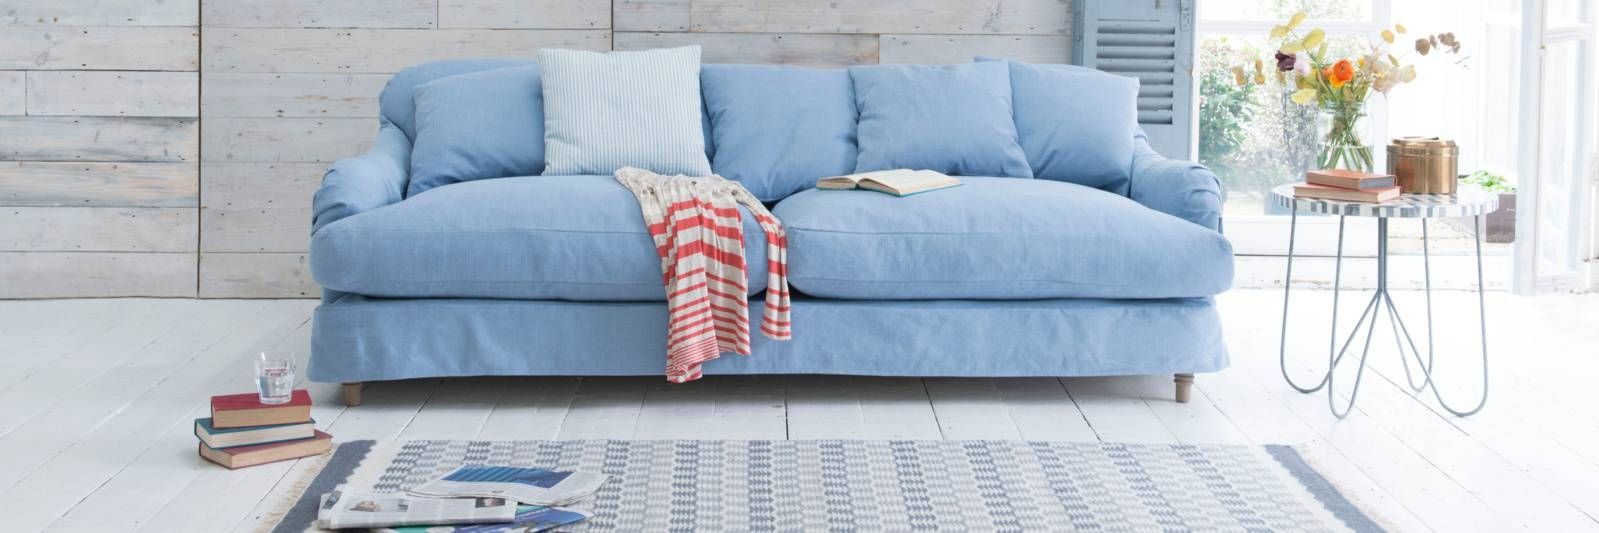 Loose Cover Sofas | Sofas With Removable Covers | Loaf Intended For Sofas With Removable Covers (View 1 of 30)